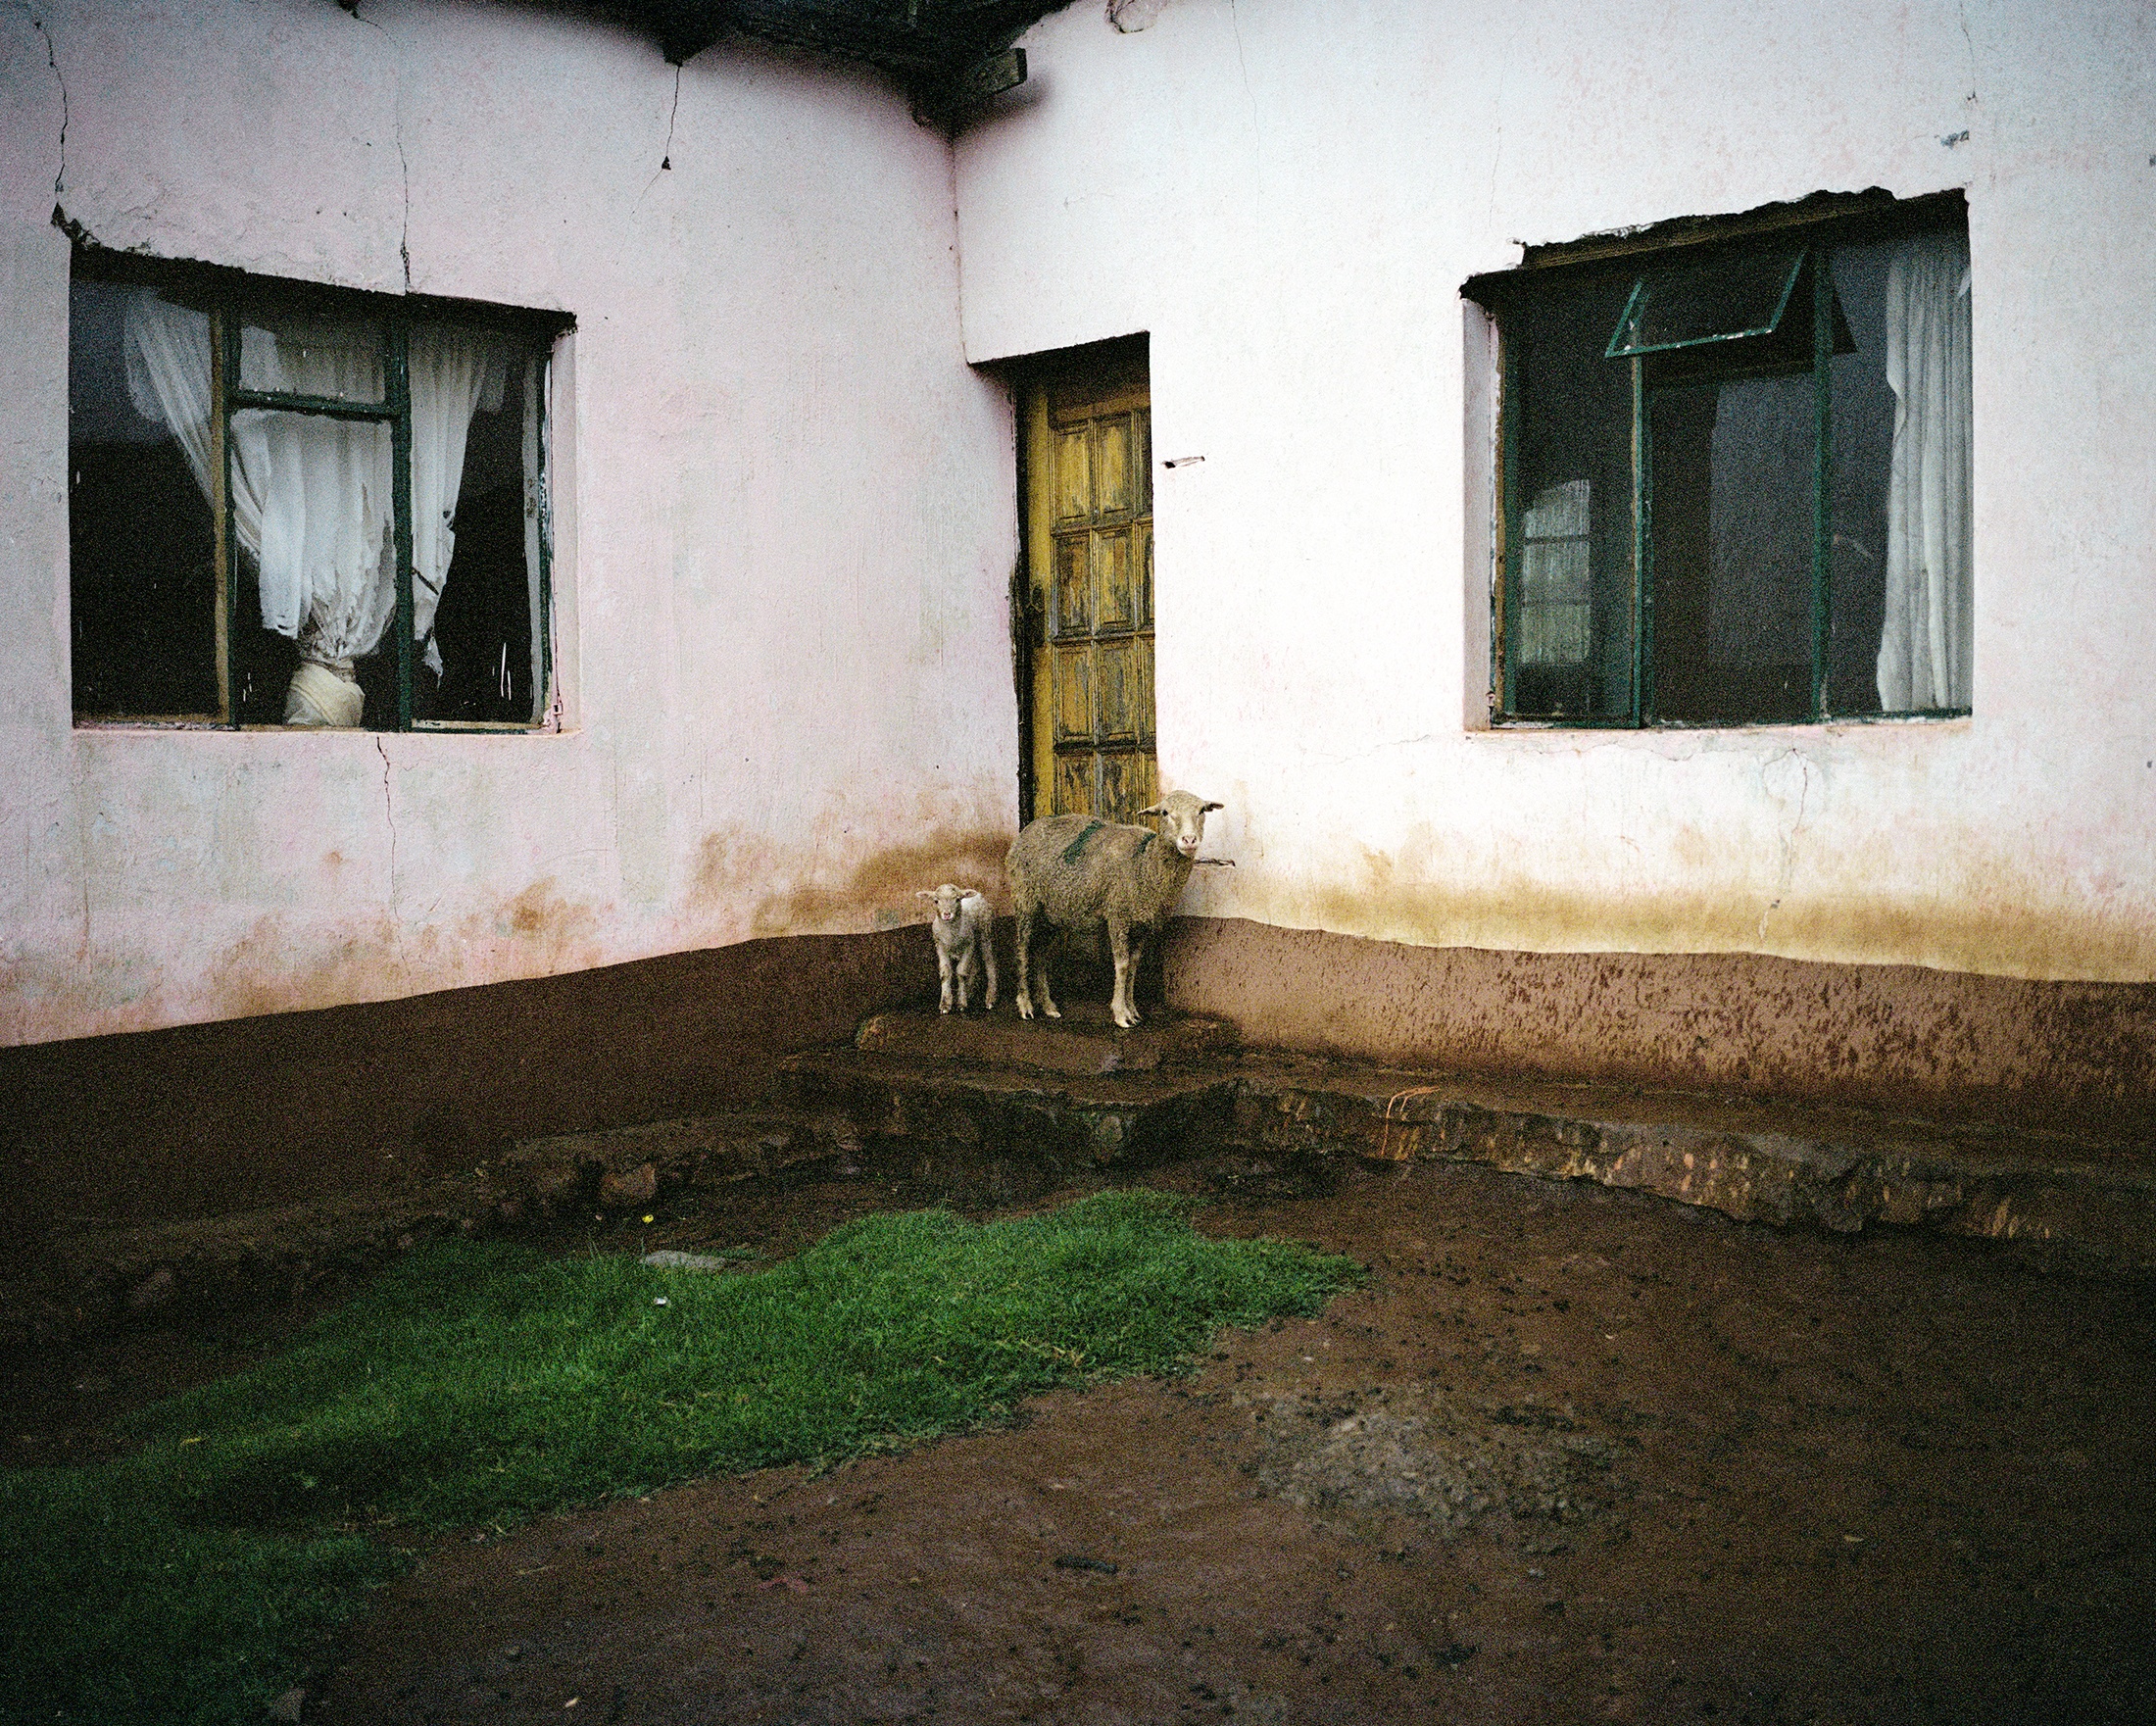 Lindokuhle Sobekwa's photograph 'Kwa Ta Mneija' shows a sheep and a lamb standing on steps at the base of a door leading into a building.
